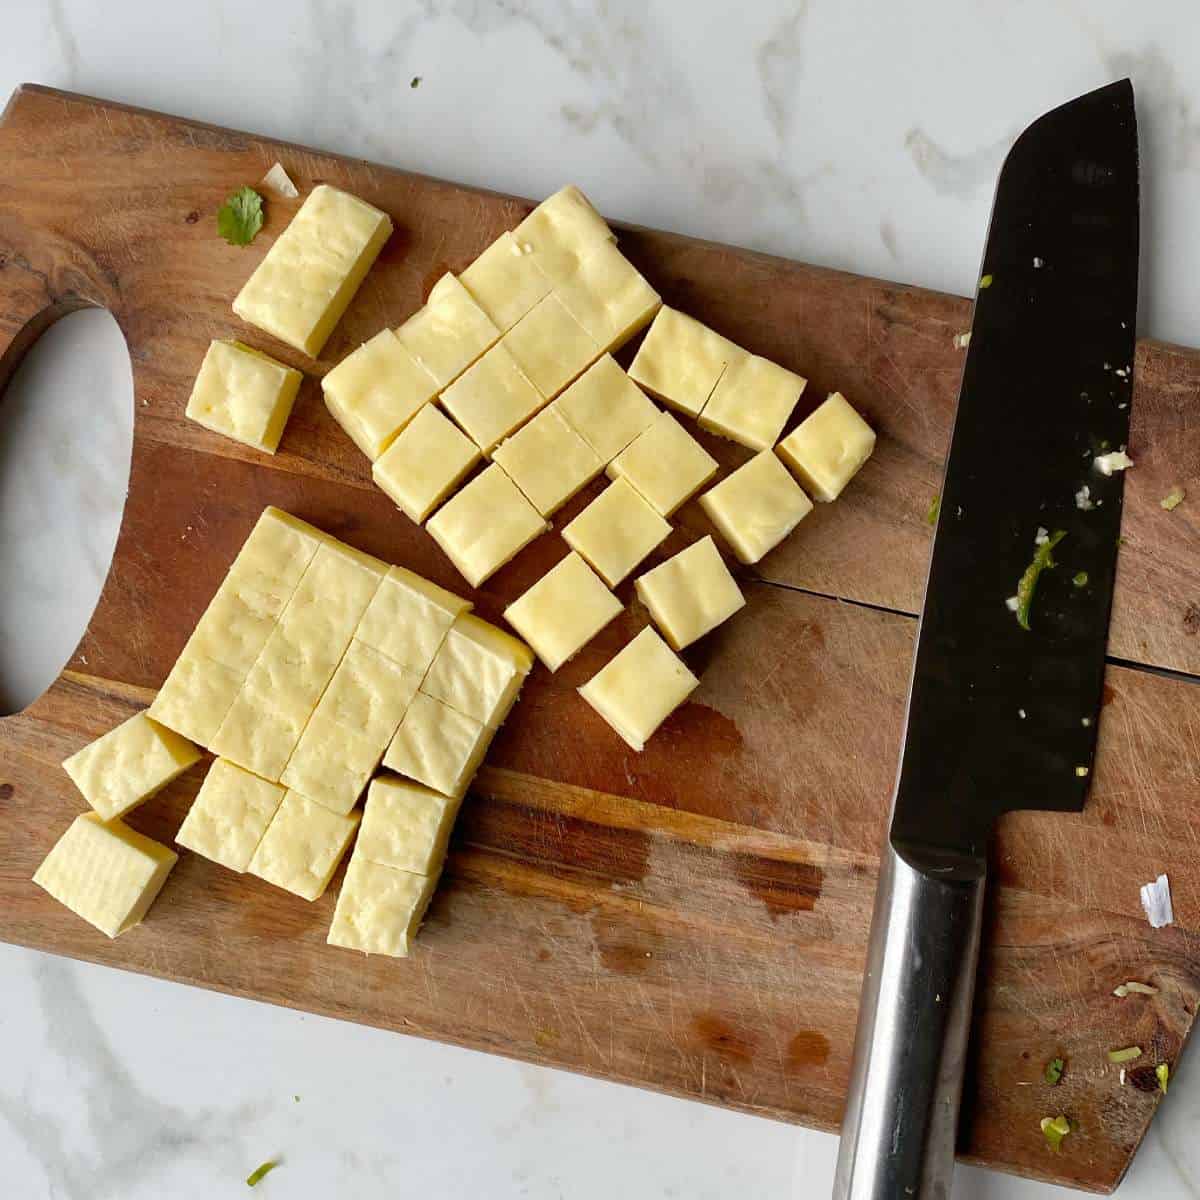 Cubed halloumi on a wooden chopping board for the paneer curry.